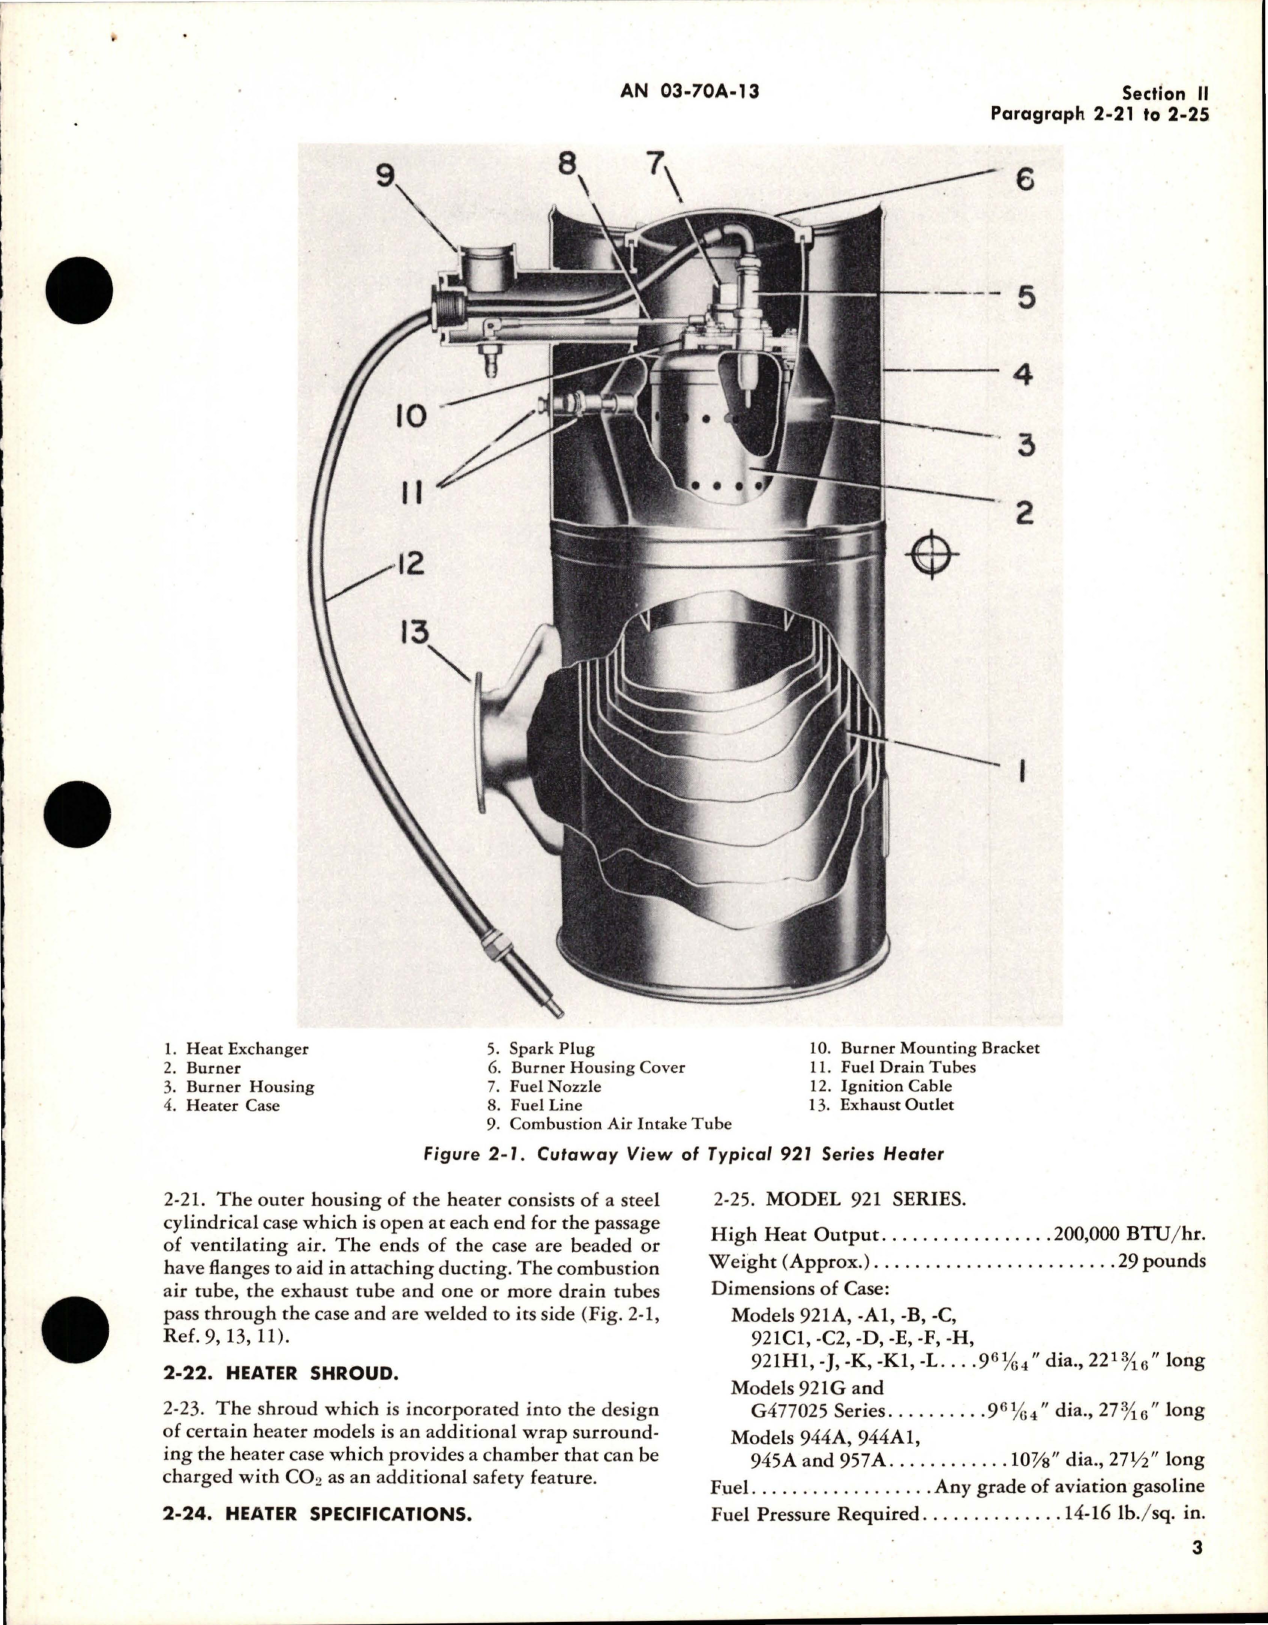 Sample page 7 from AirCorps Library document: Overhaul Instructions for Aircraft Heaters - Model 920, 921 and 930 Series